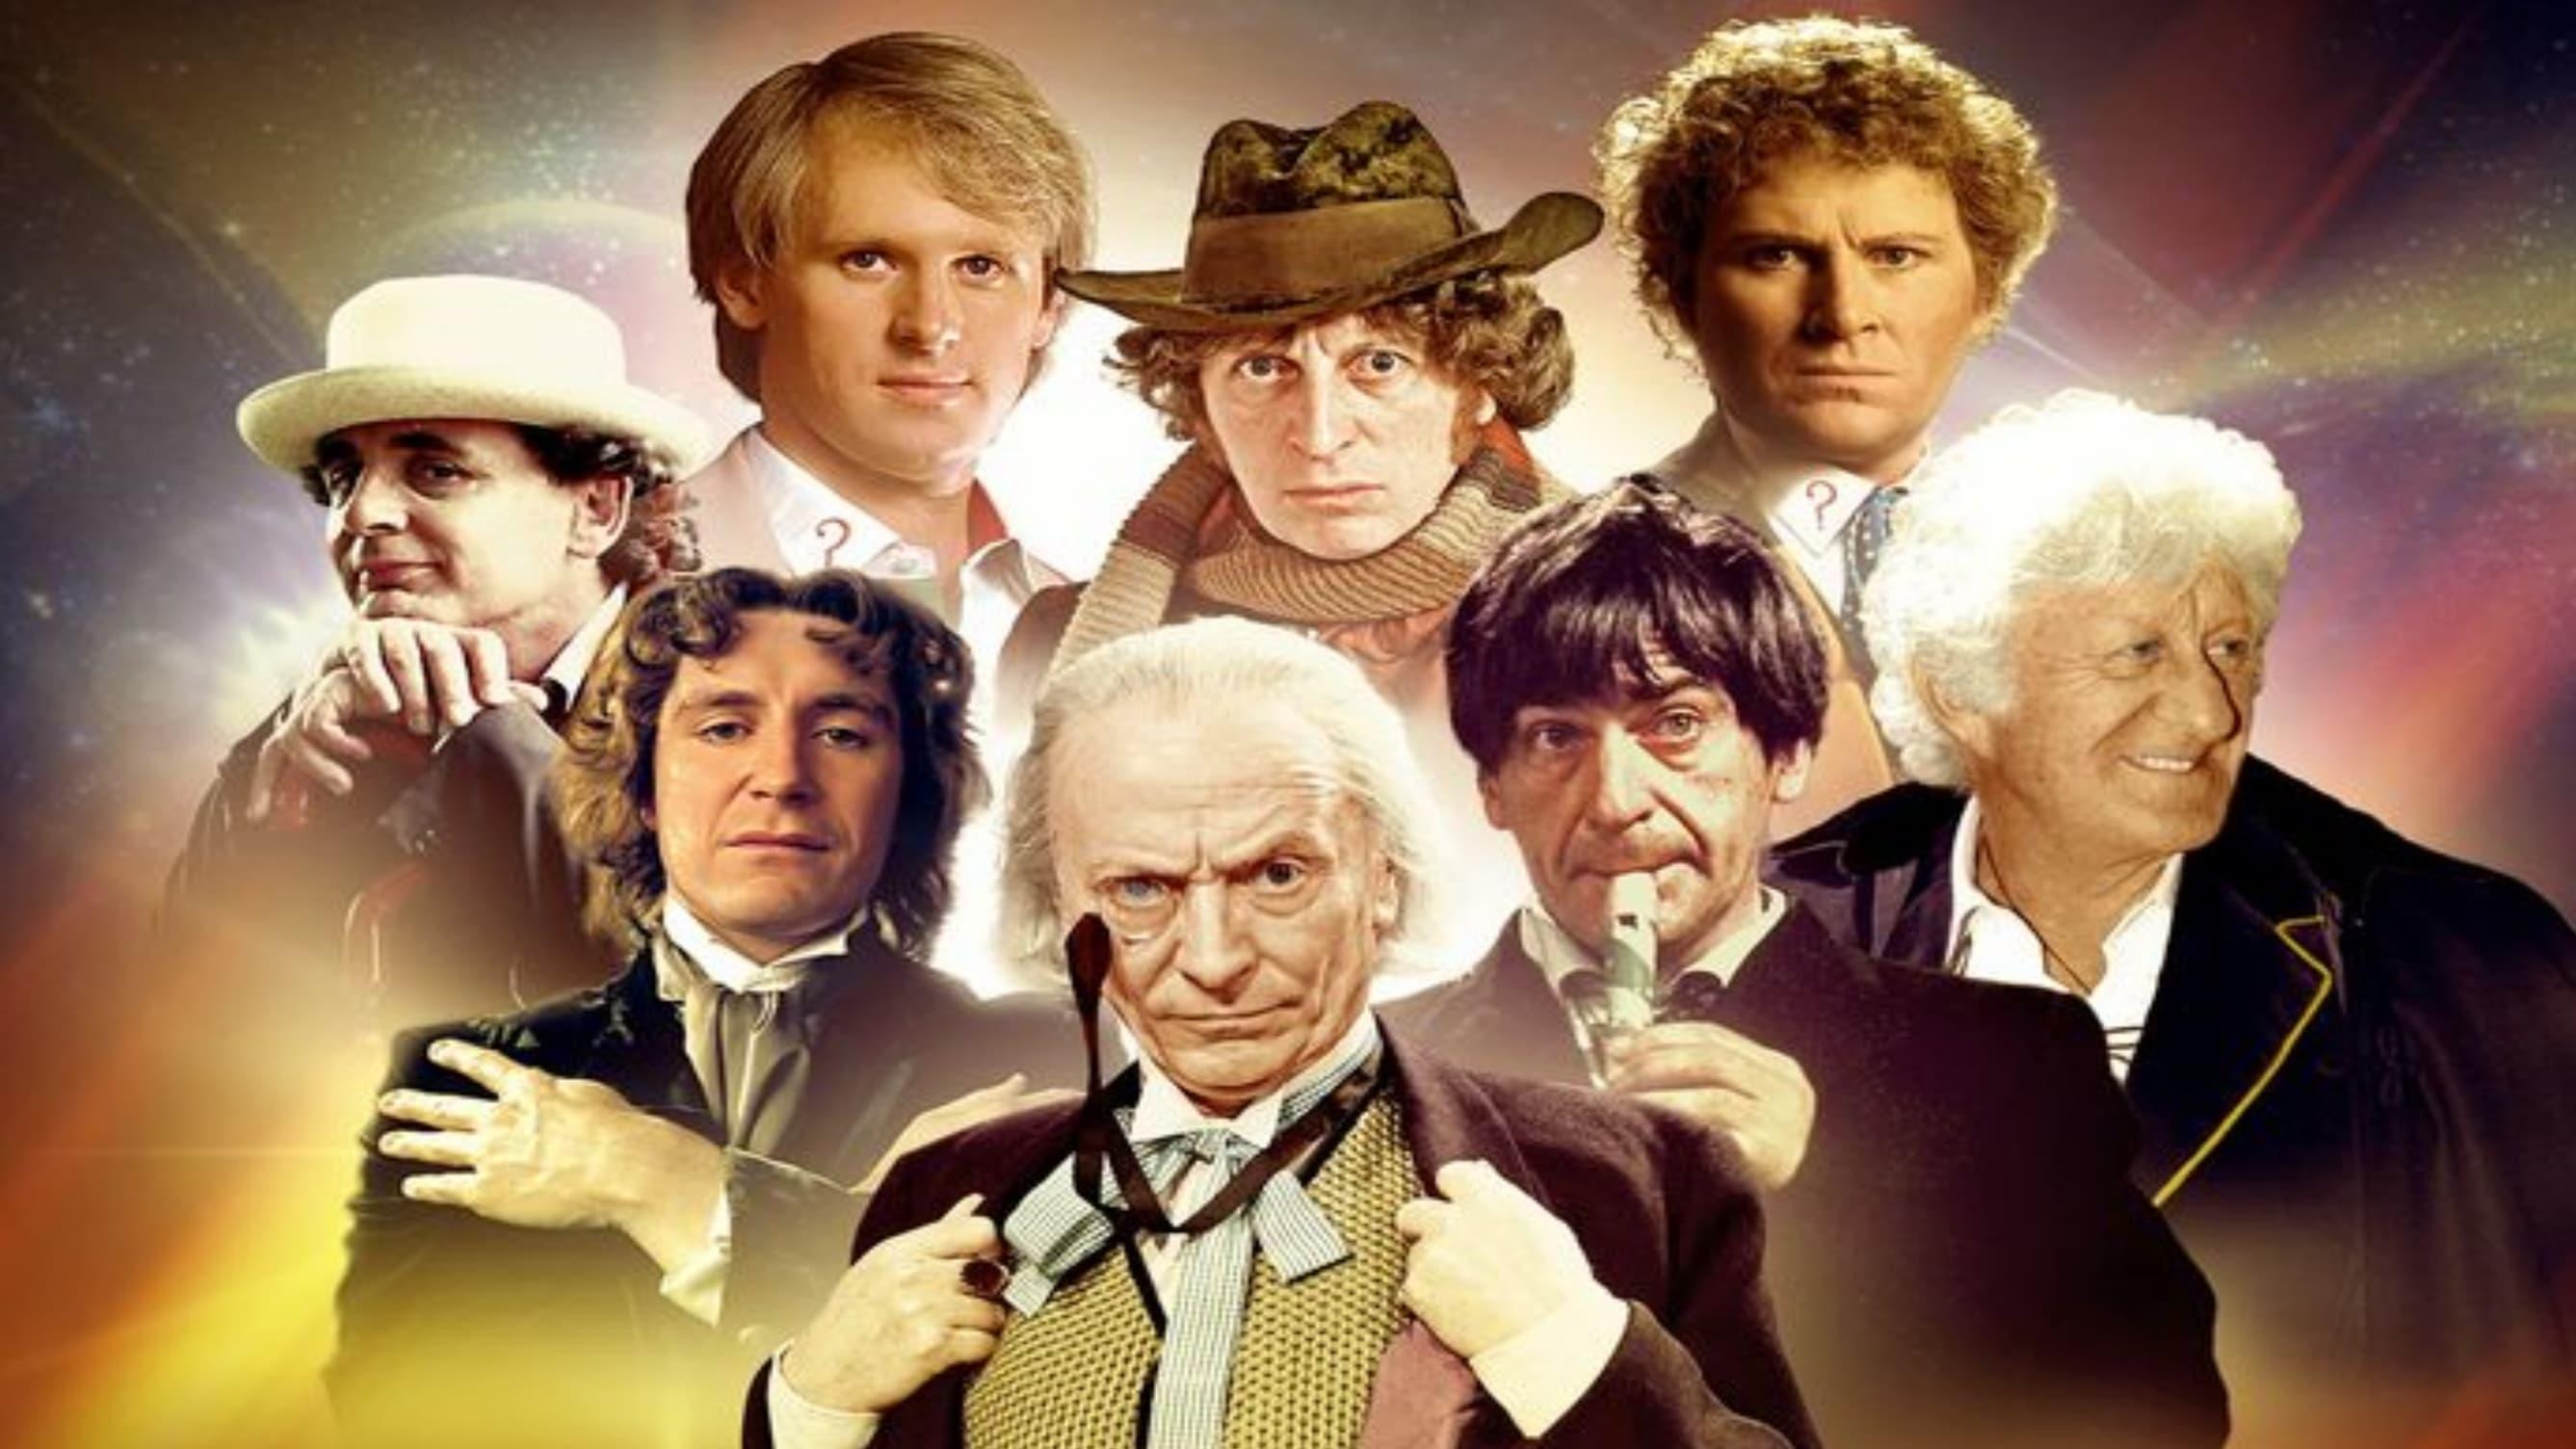 The Doctors: The William Hartnell Years backdrop